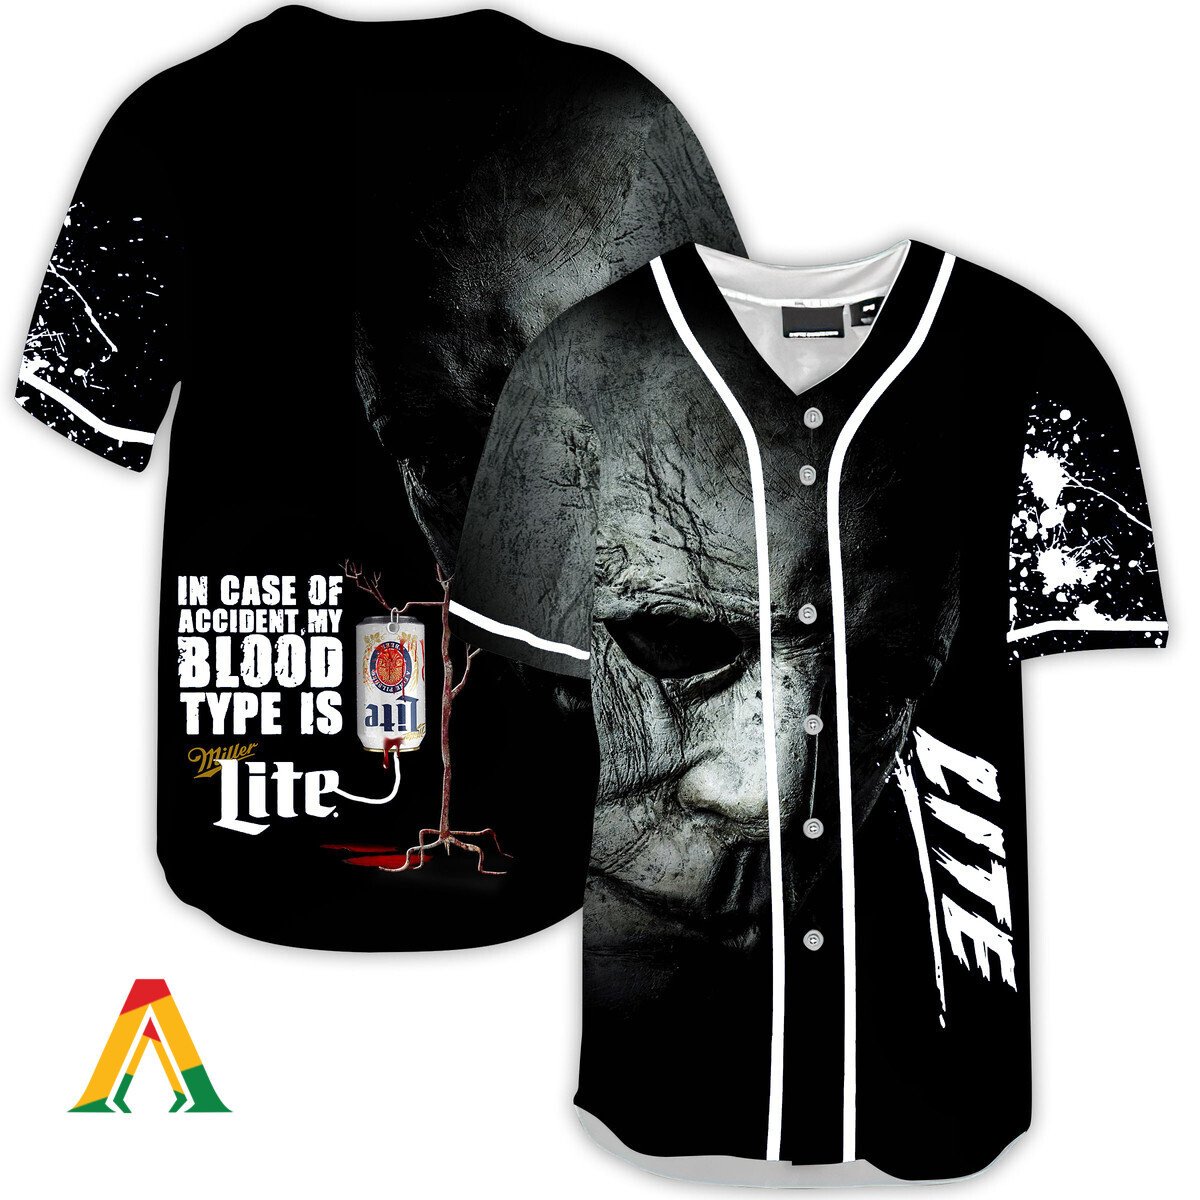 Michael Myers In Case Of Accident My Blood Type Is Miller Lite Beer Baseball Jersey